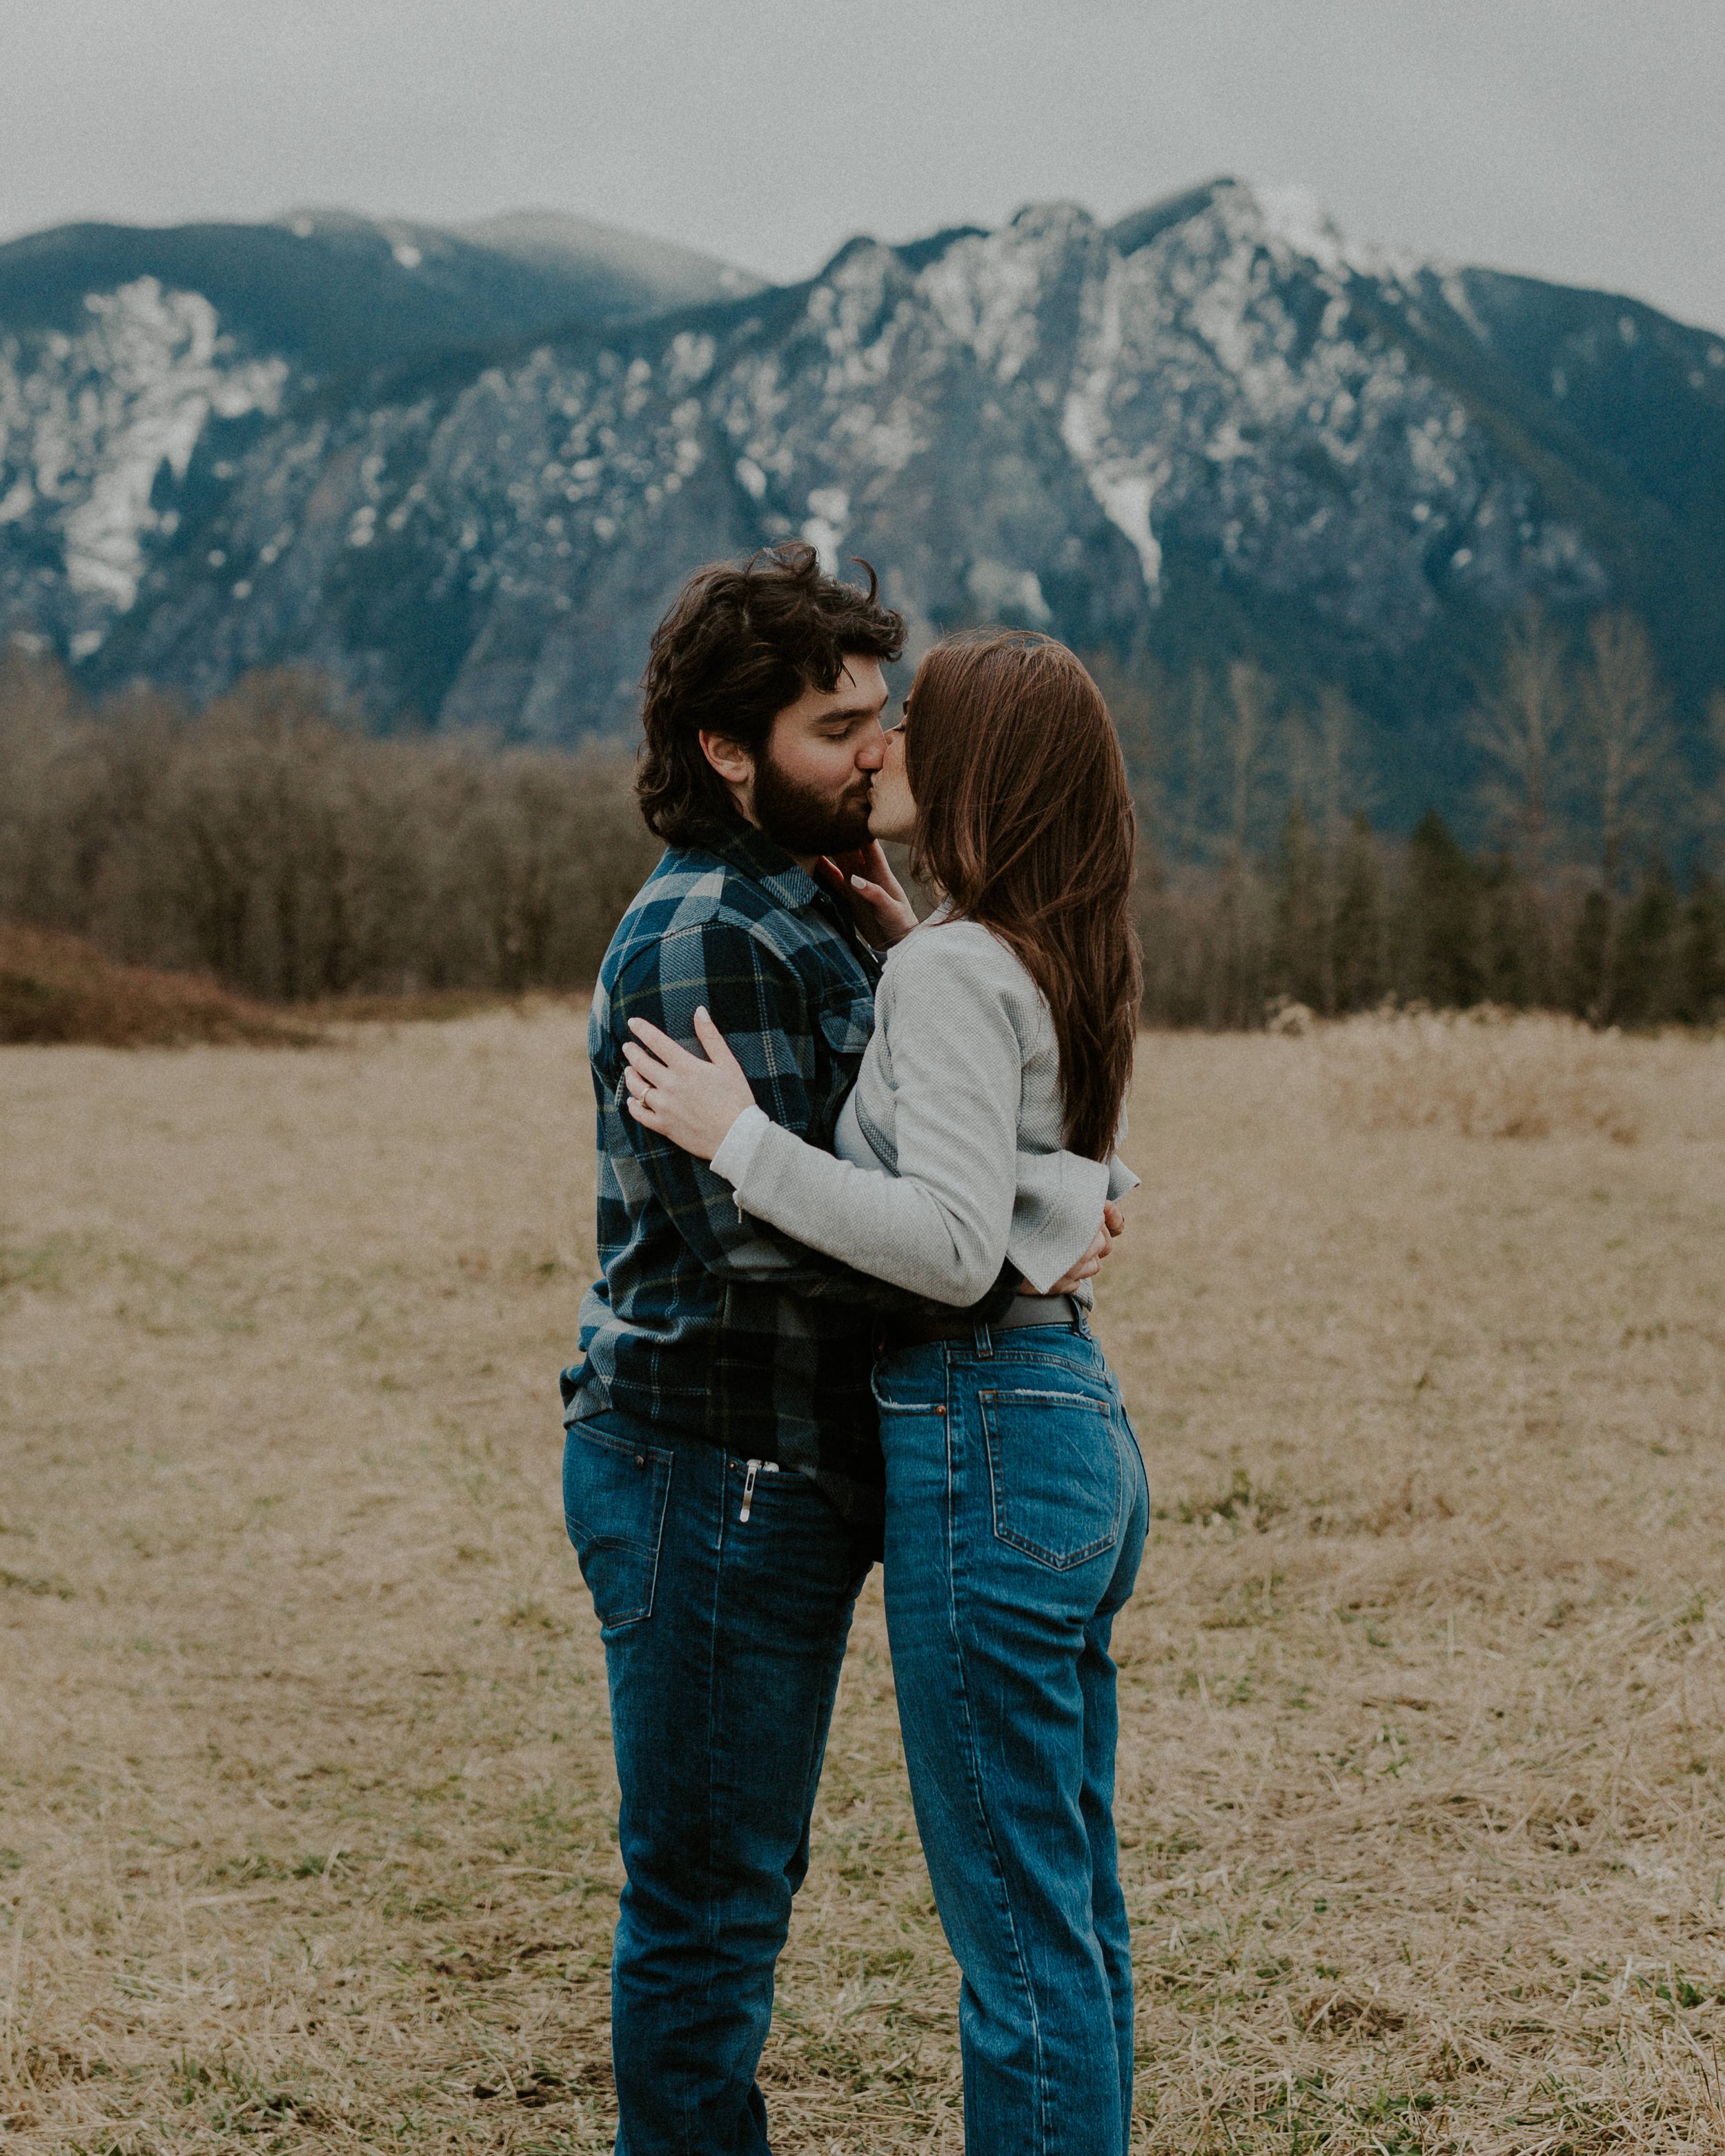 warren-marshall-photography-spring-mountains-engagement-session17.jpg